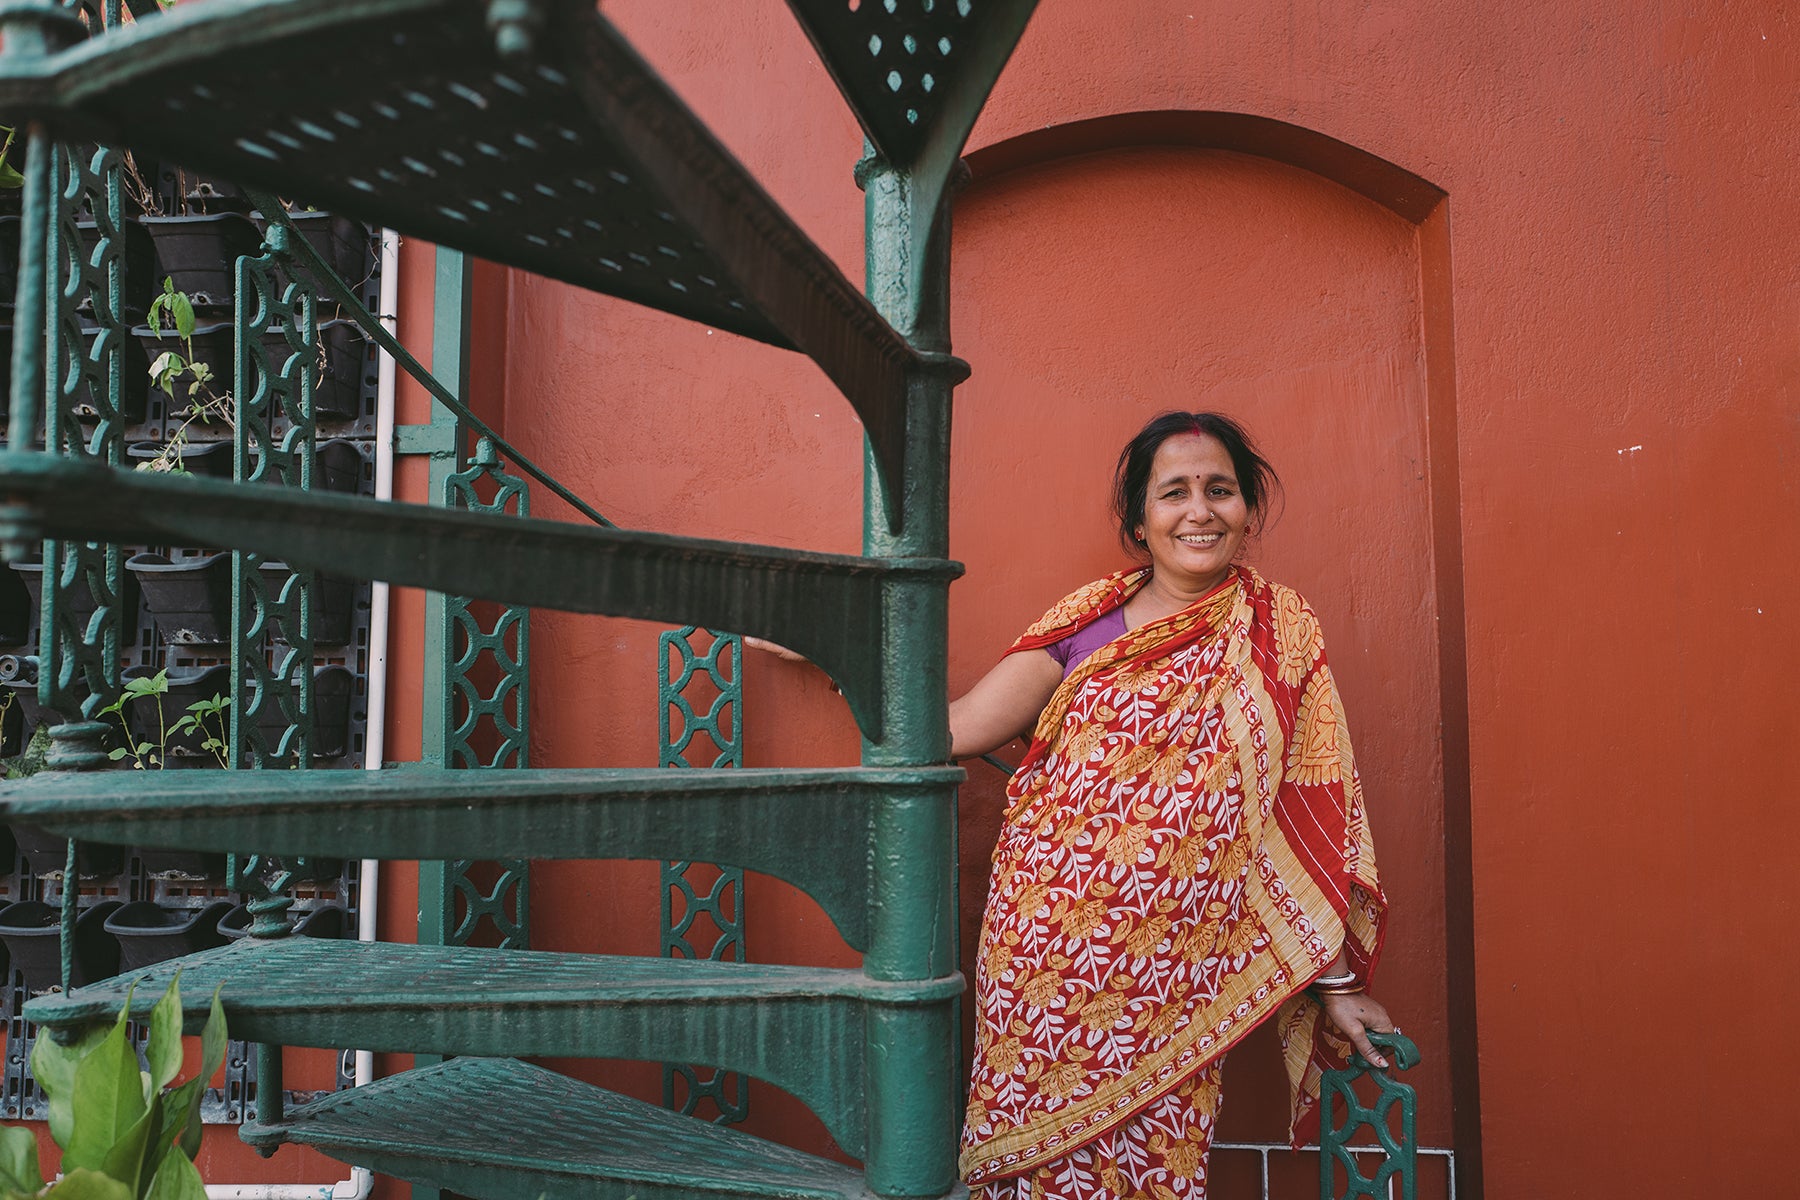 Joyya staff woman standing at the foot of a spiral stair case in Kolkata India